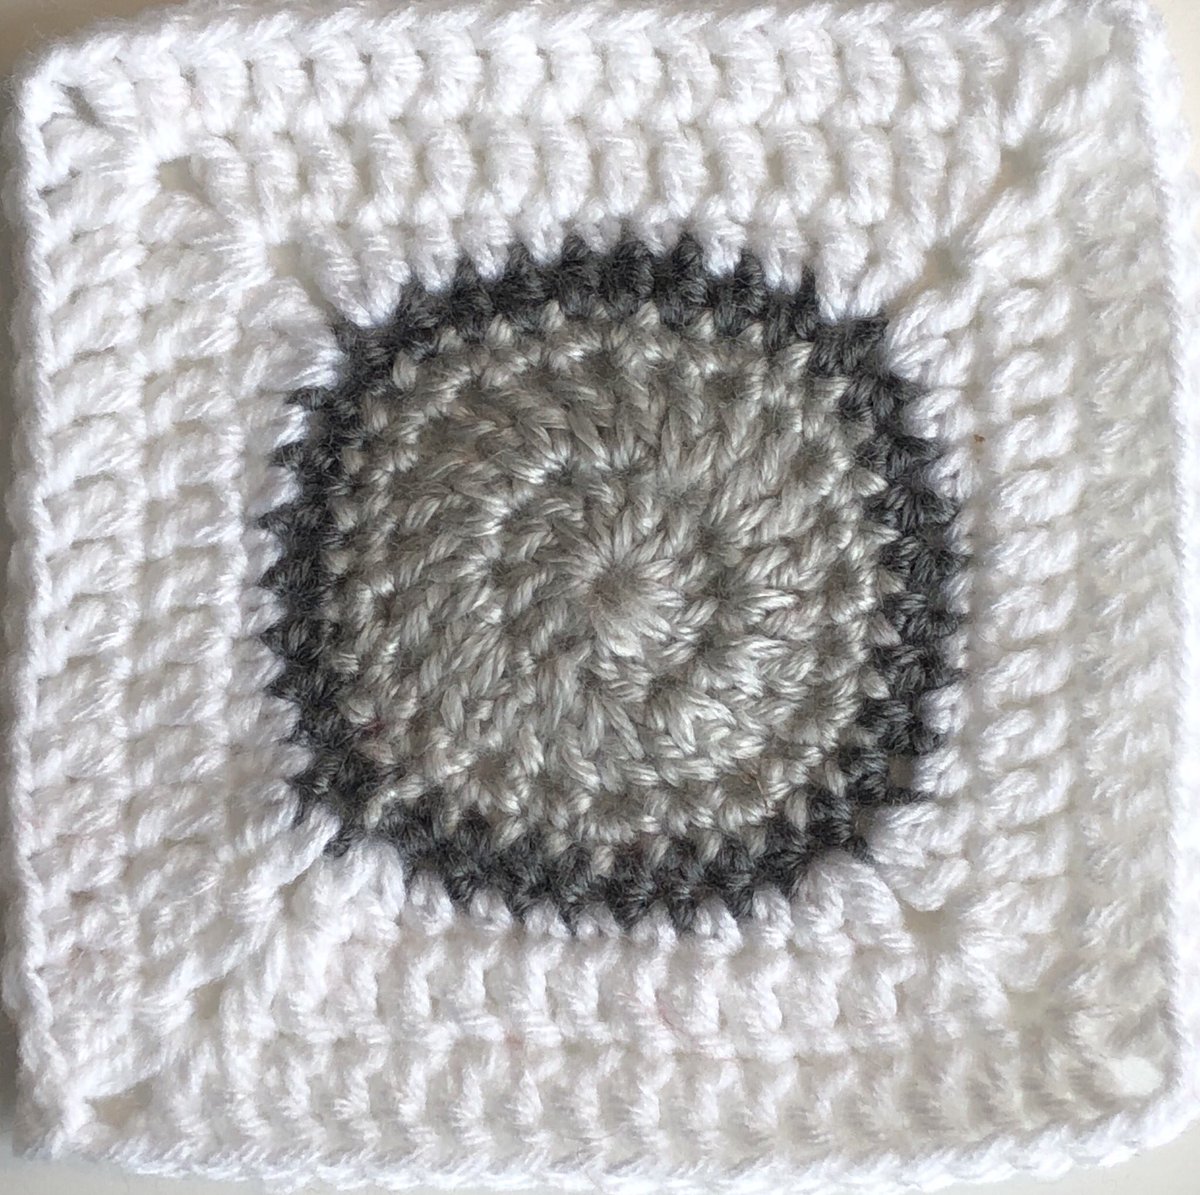 Starting a new blanket project. Not sure how it’ll work out since I’m not following a pattern this time. The subject: viruses. Here’s the foundation of the first square.